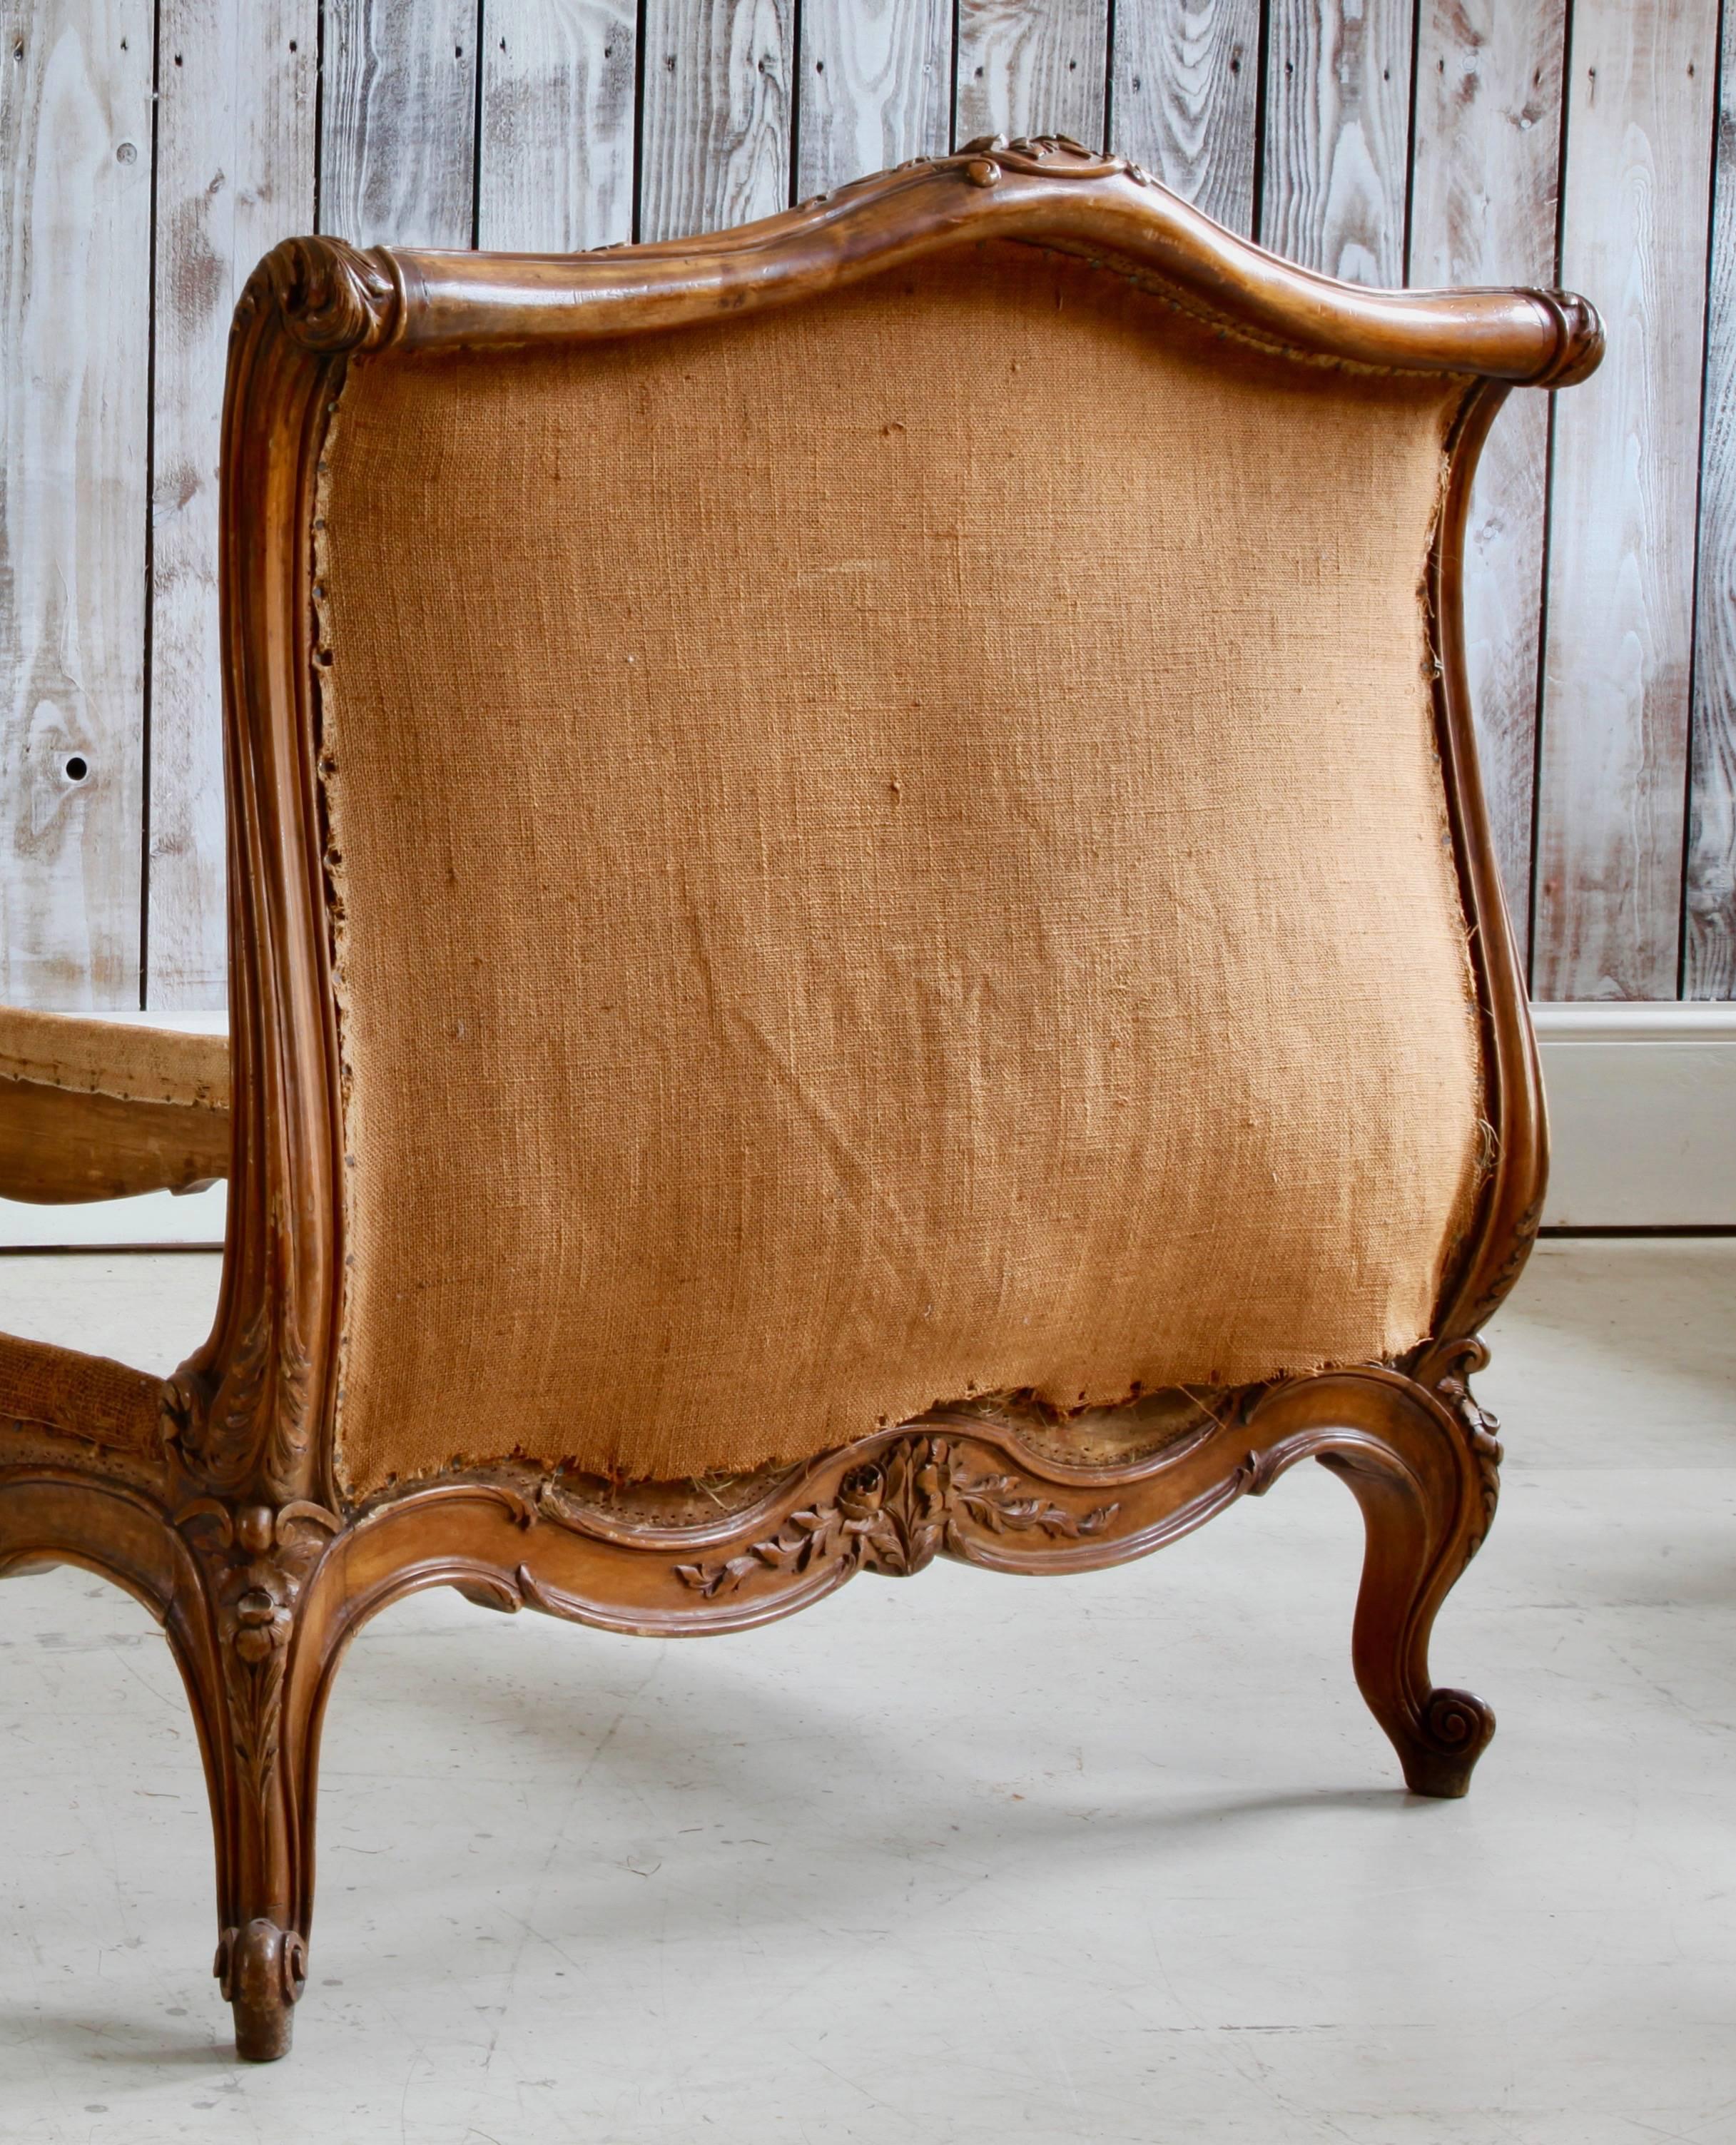 Louis XV style daybed, with scroll tops, solid walnut.
Very good carving with fine details all around.
  

 